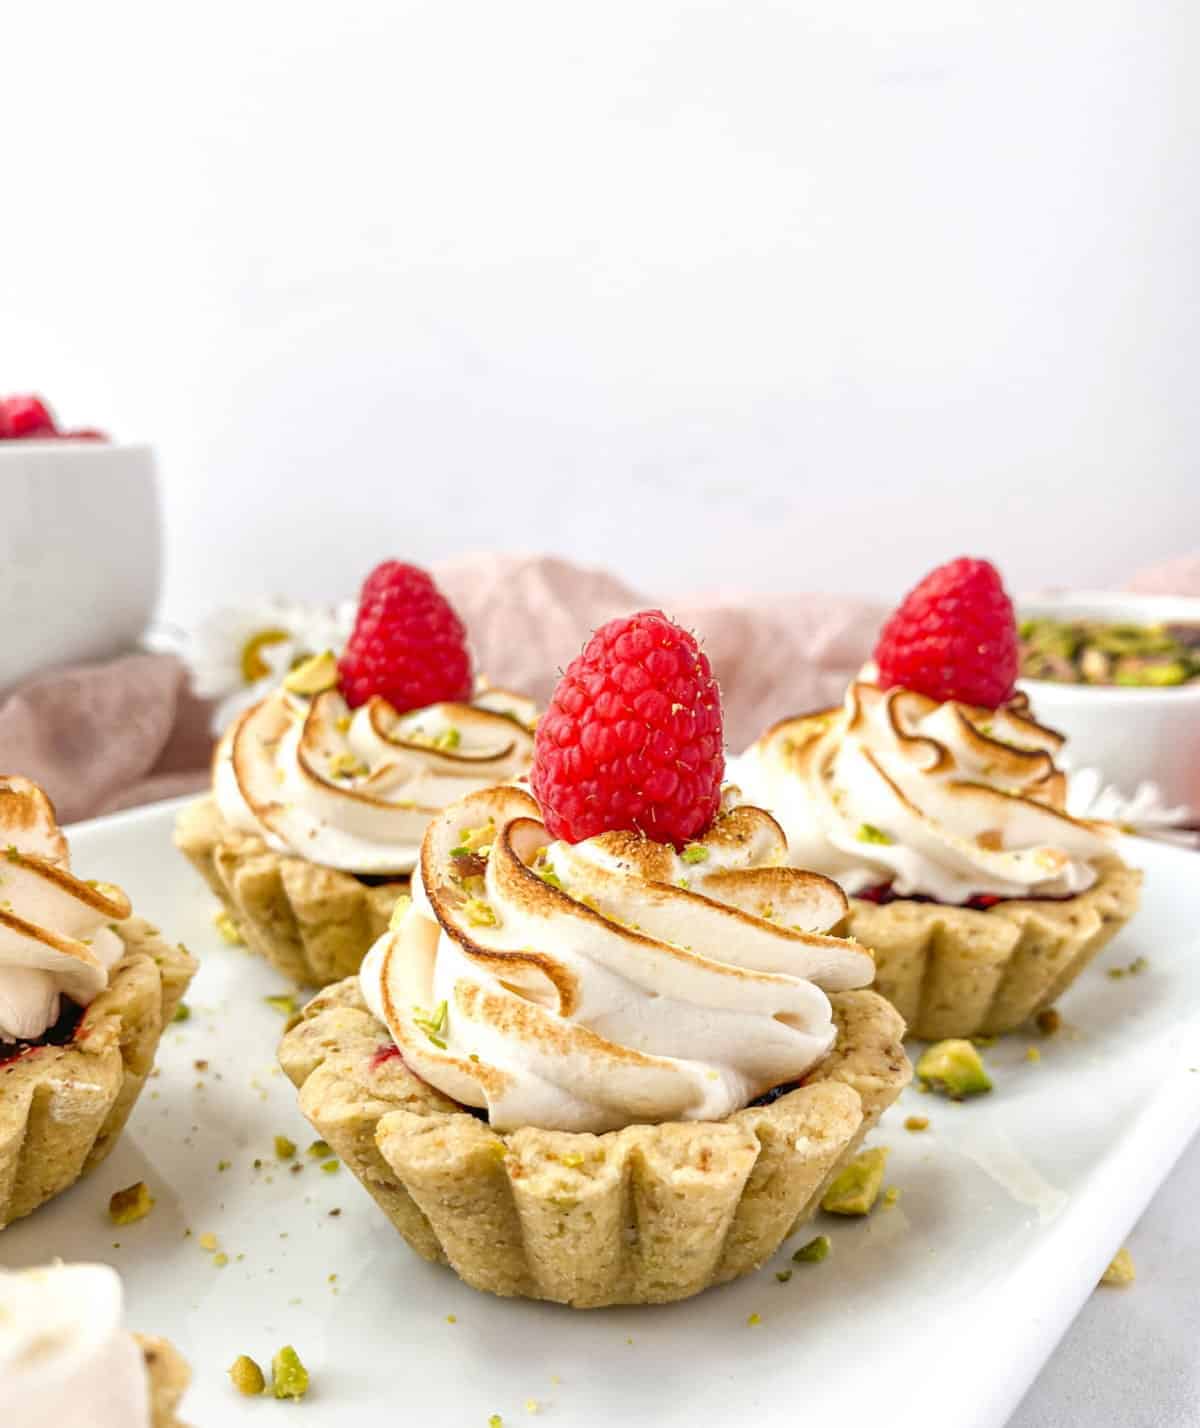 Several Raspberry Pistachio Tartlets linesd up on a white plate